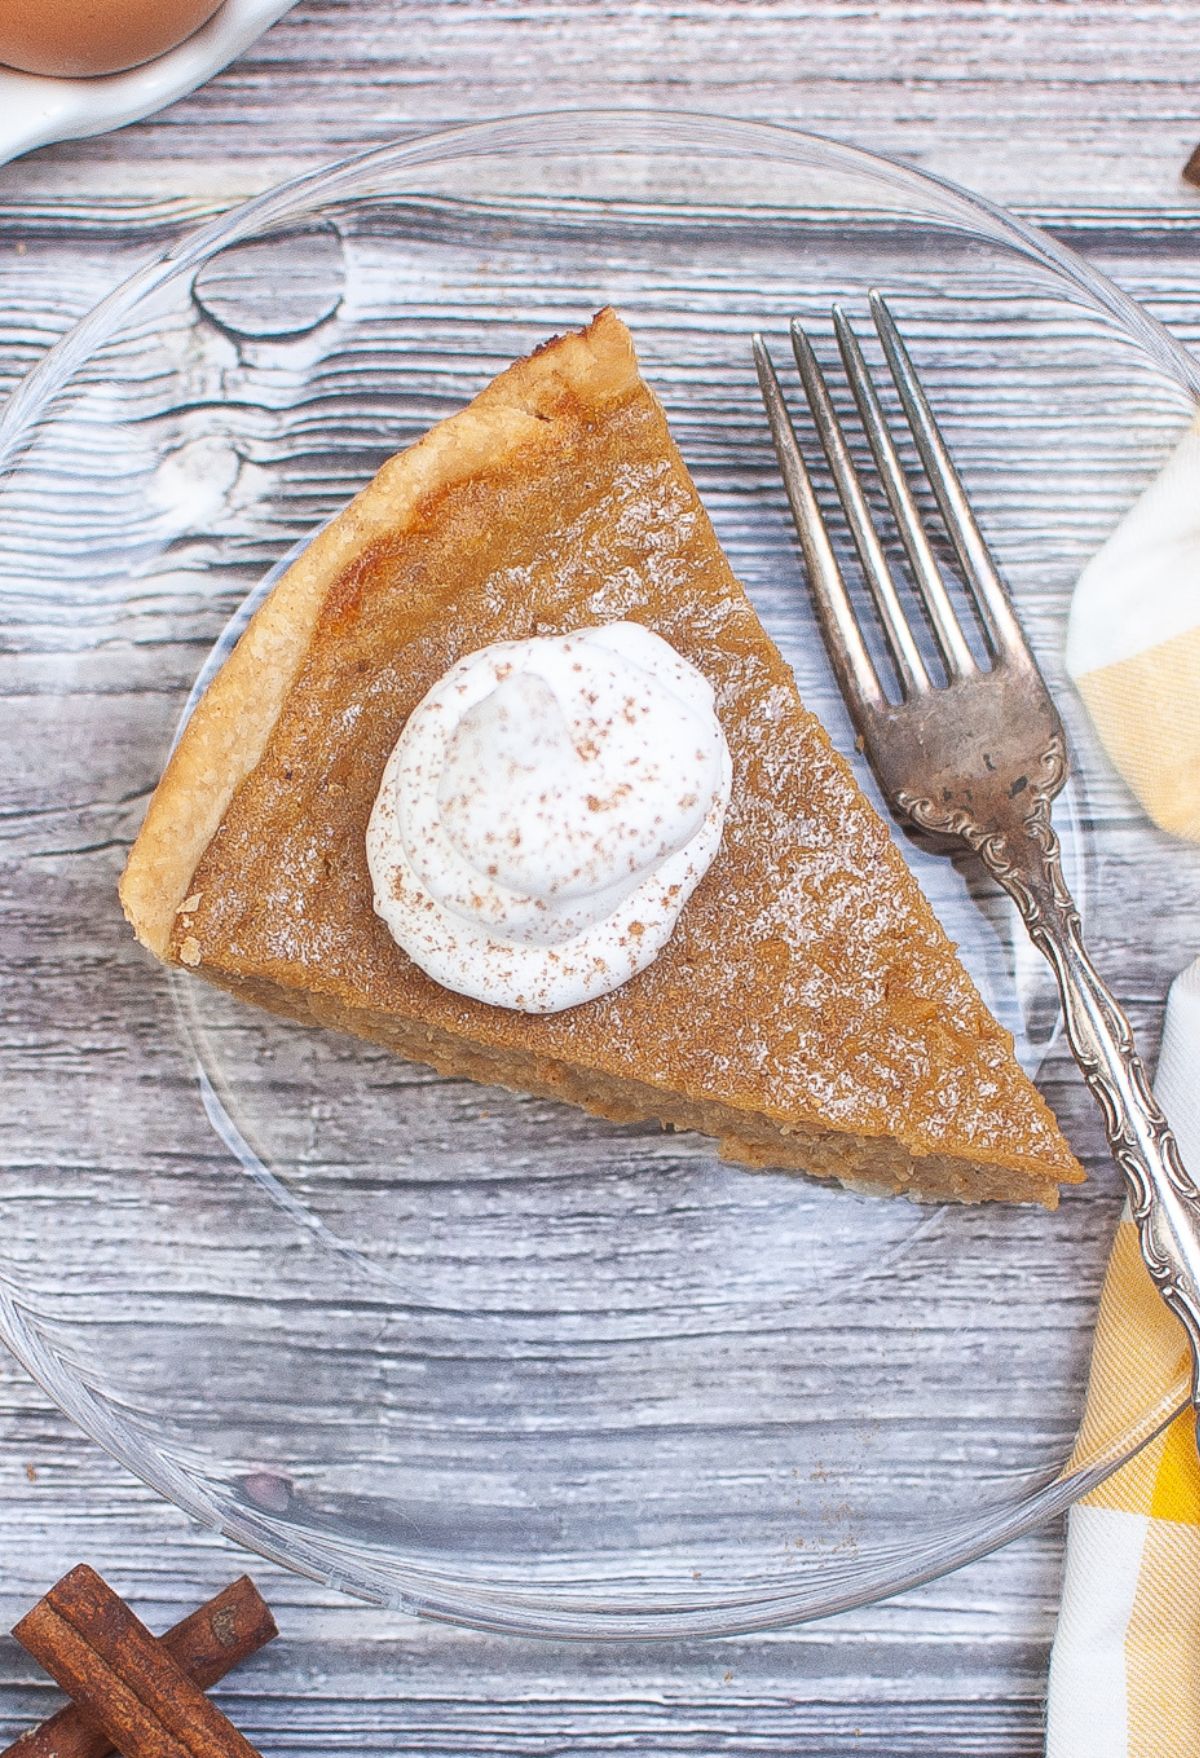 A slice of sweet potato pie with whipped cream on a plate.